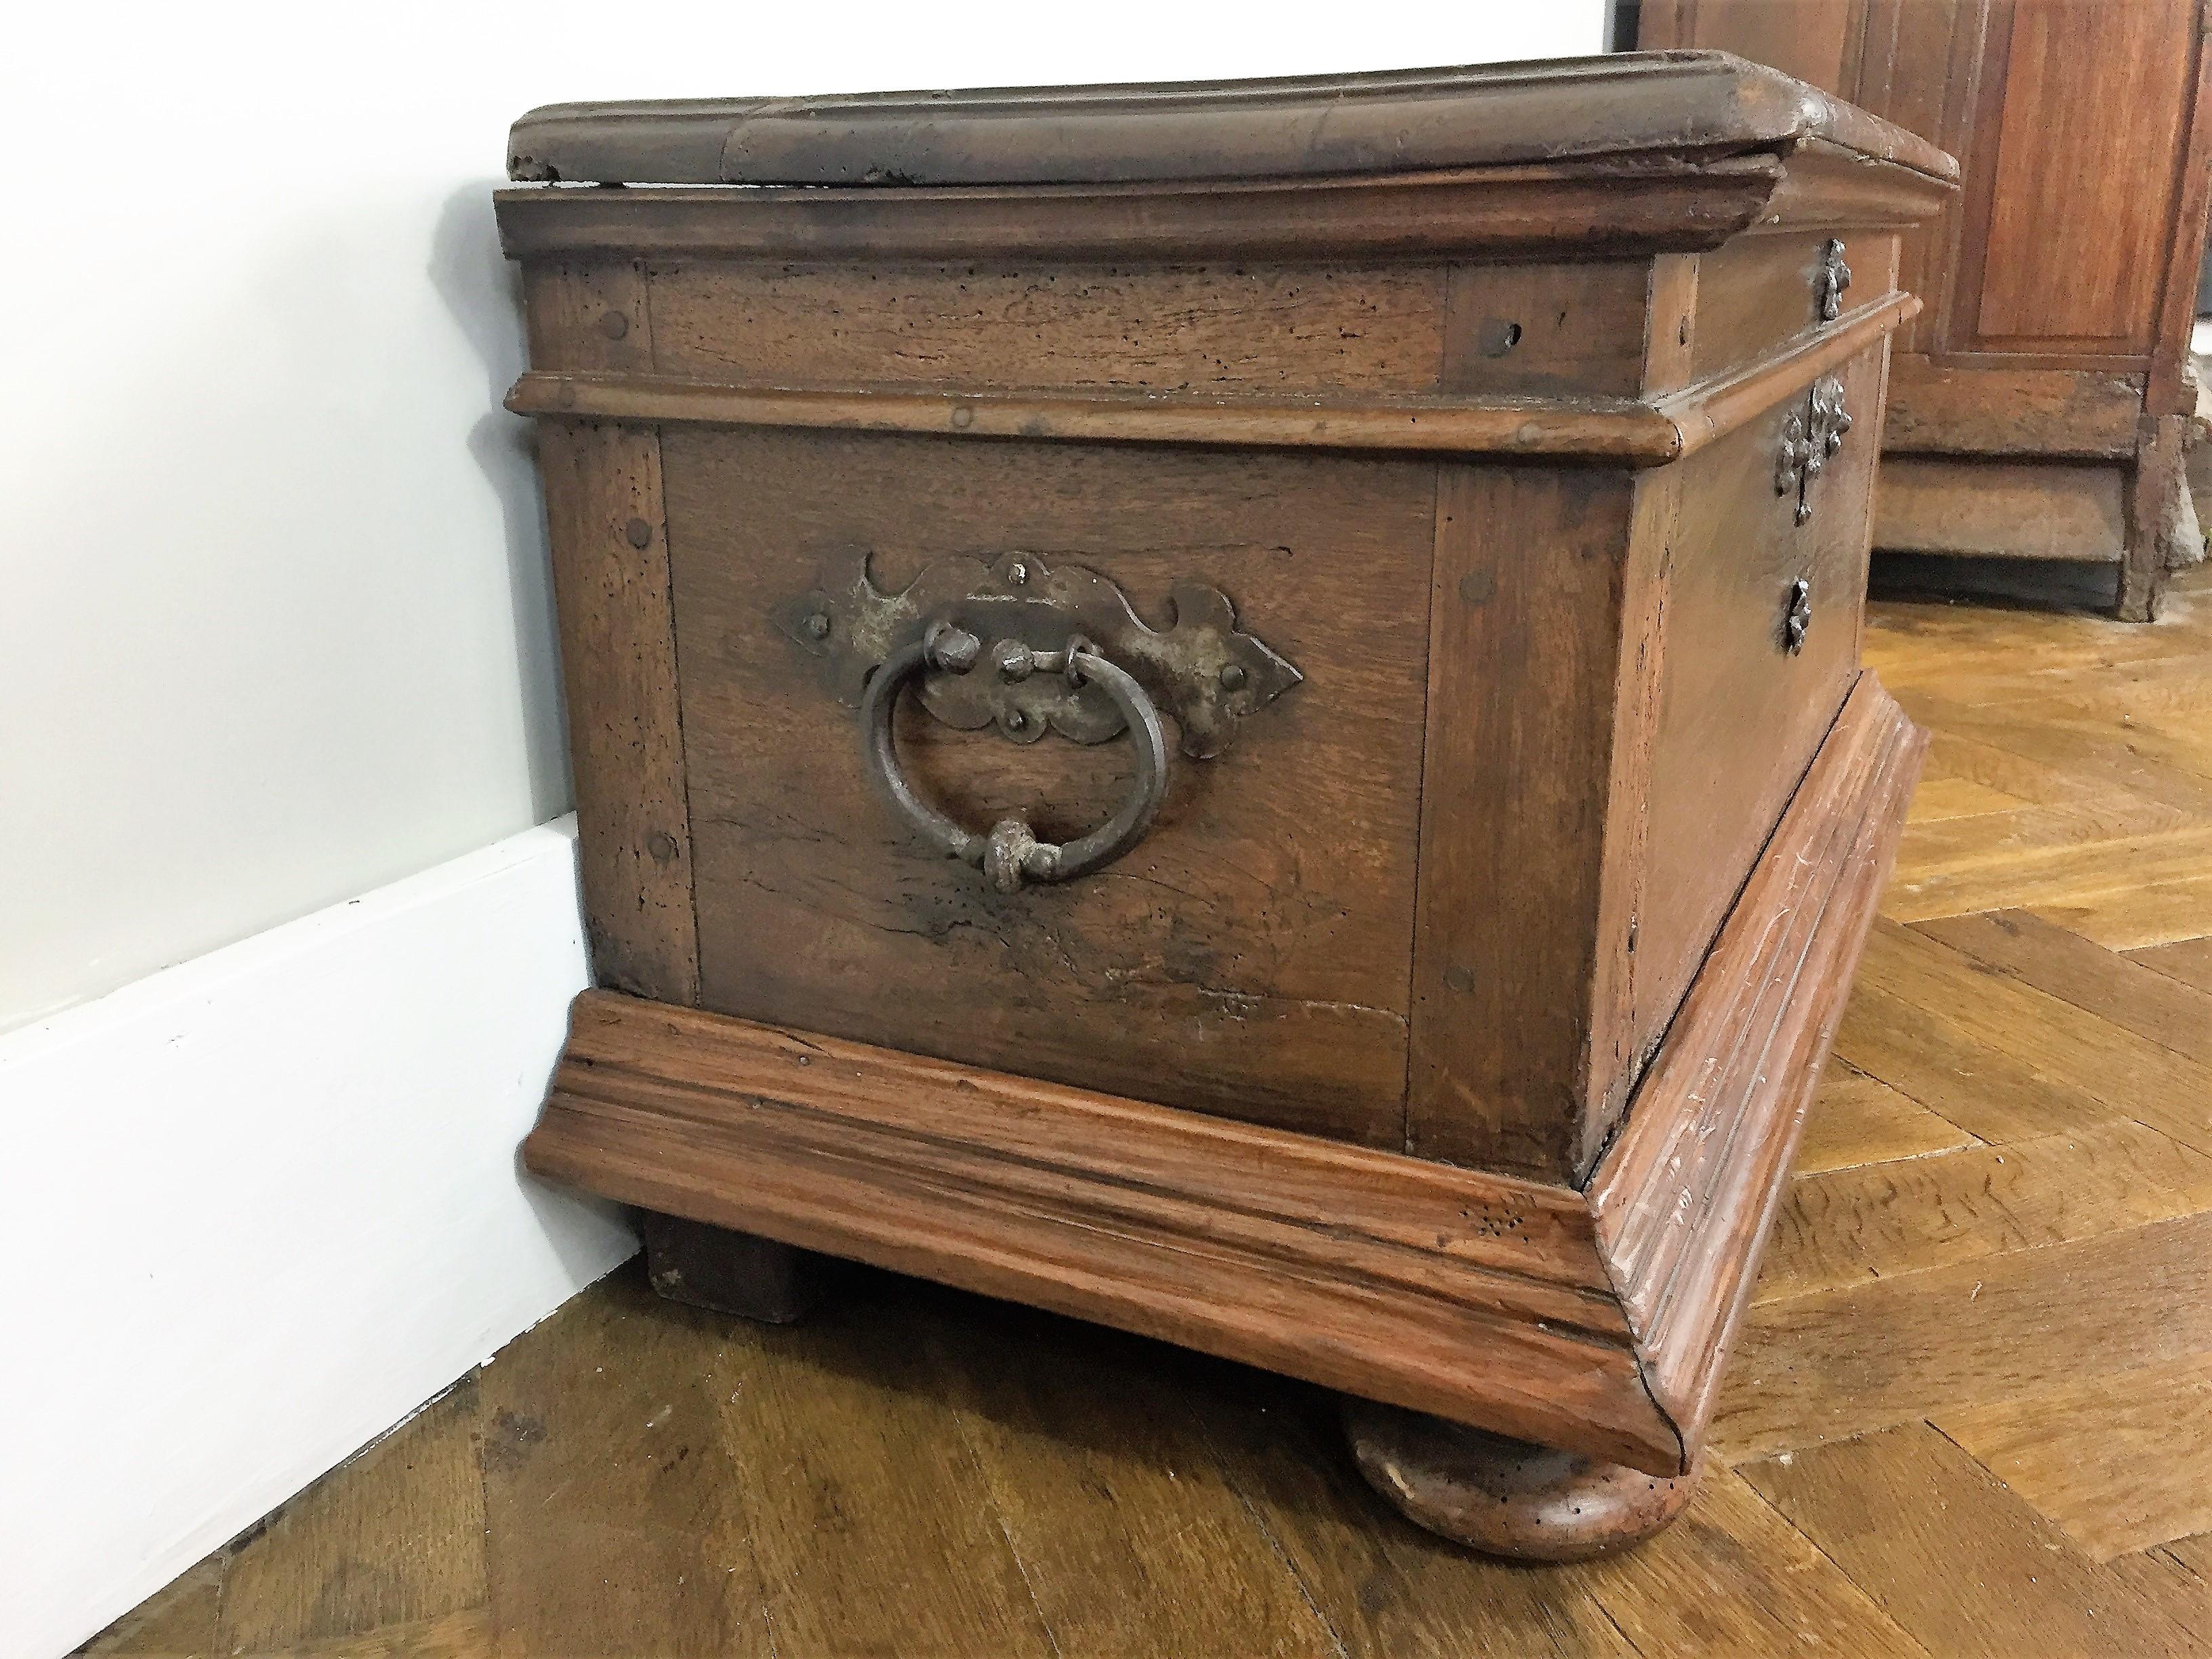 Charming small chest with flat ball shape feet. Lock surrounded by four stylized wrought iron flowers. On the sides two beautiful wrought iron handles.
This kind of chest was usually used for traveling, its the ancestors of the suitcase.
France,